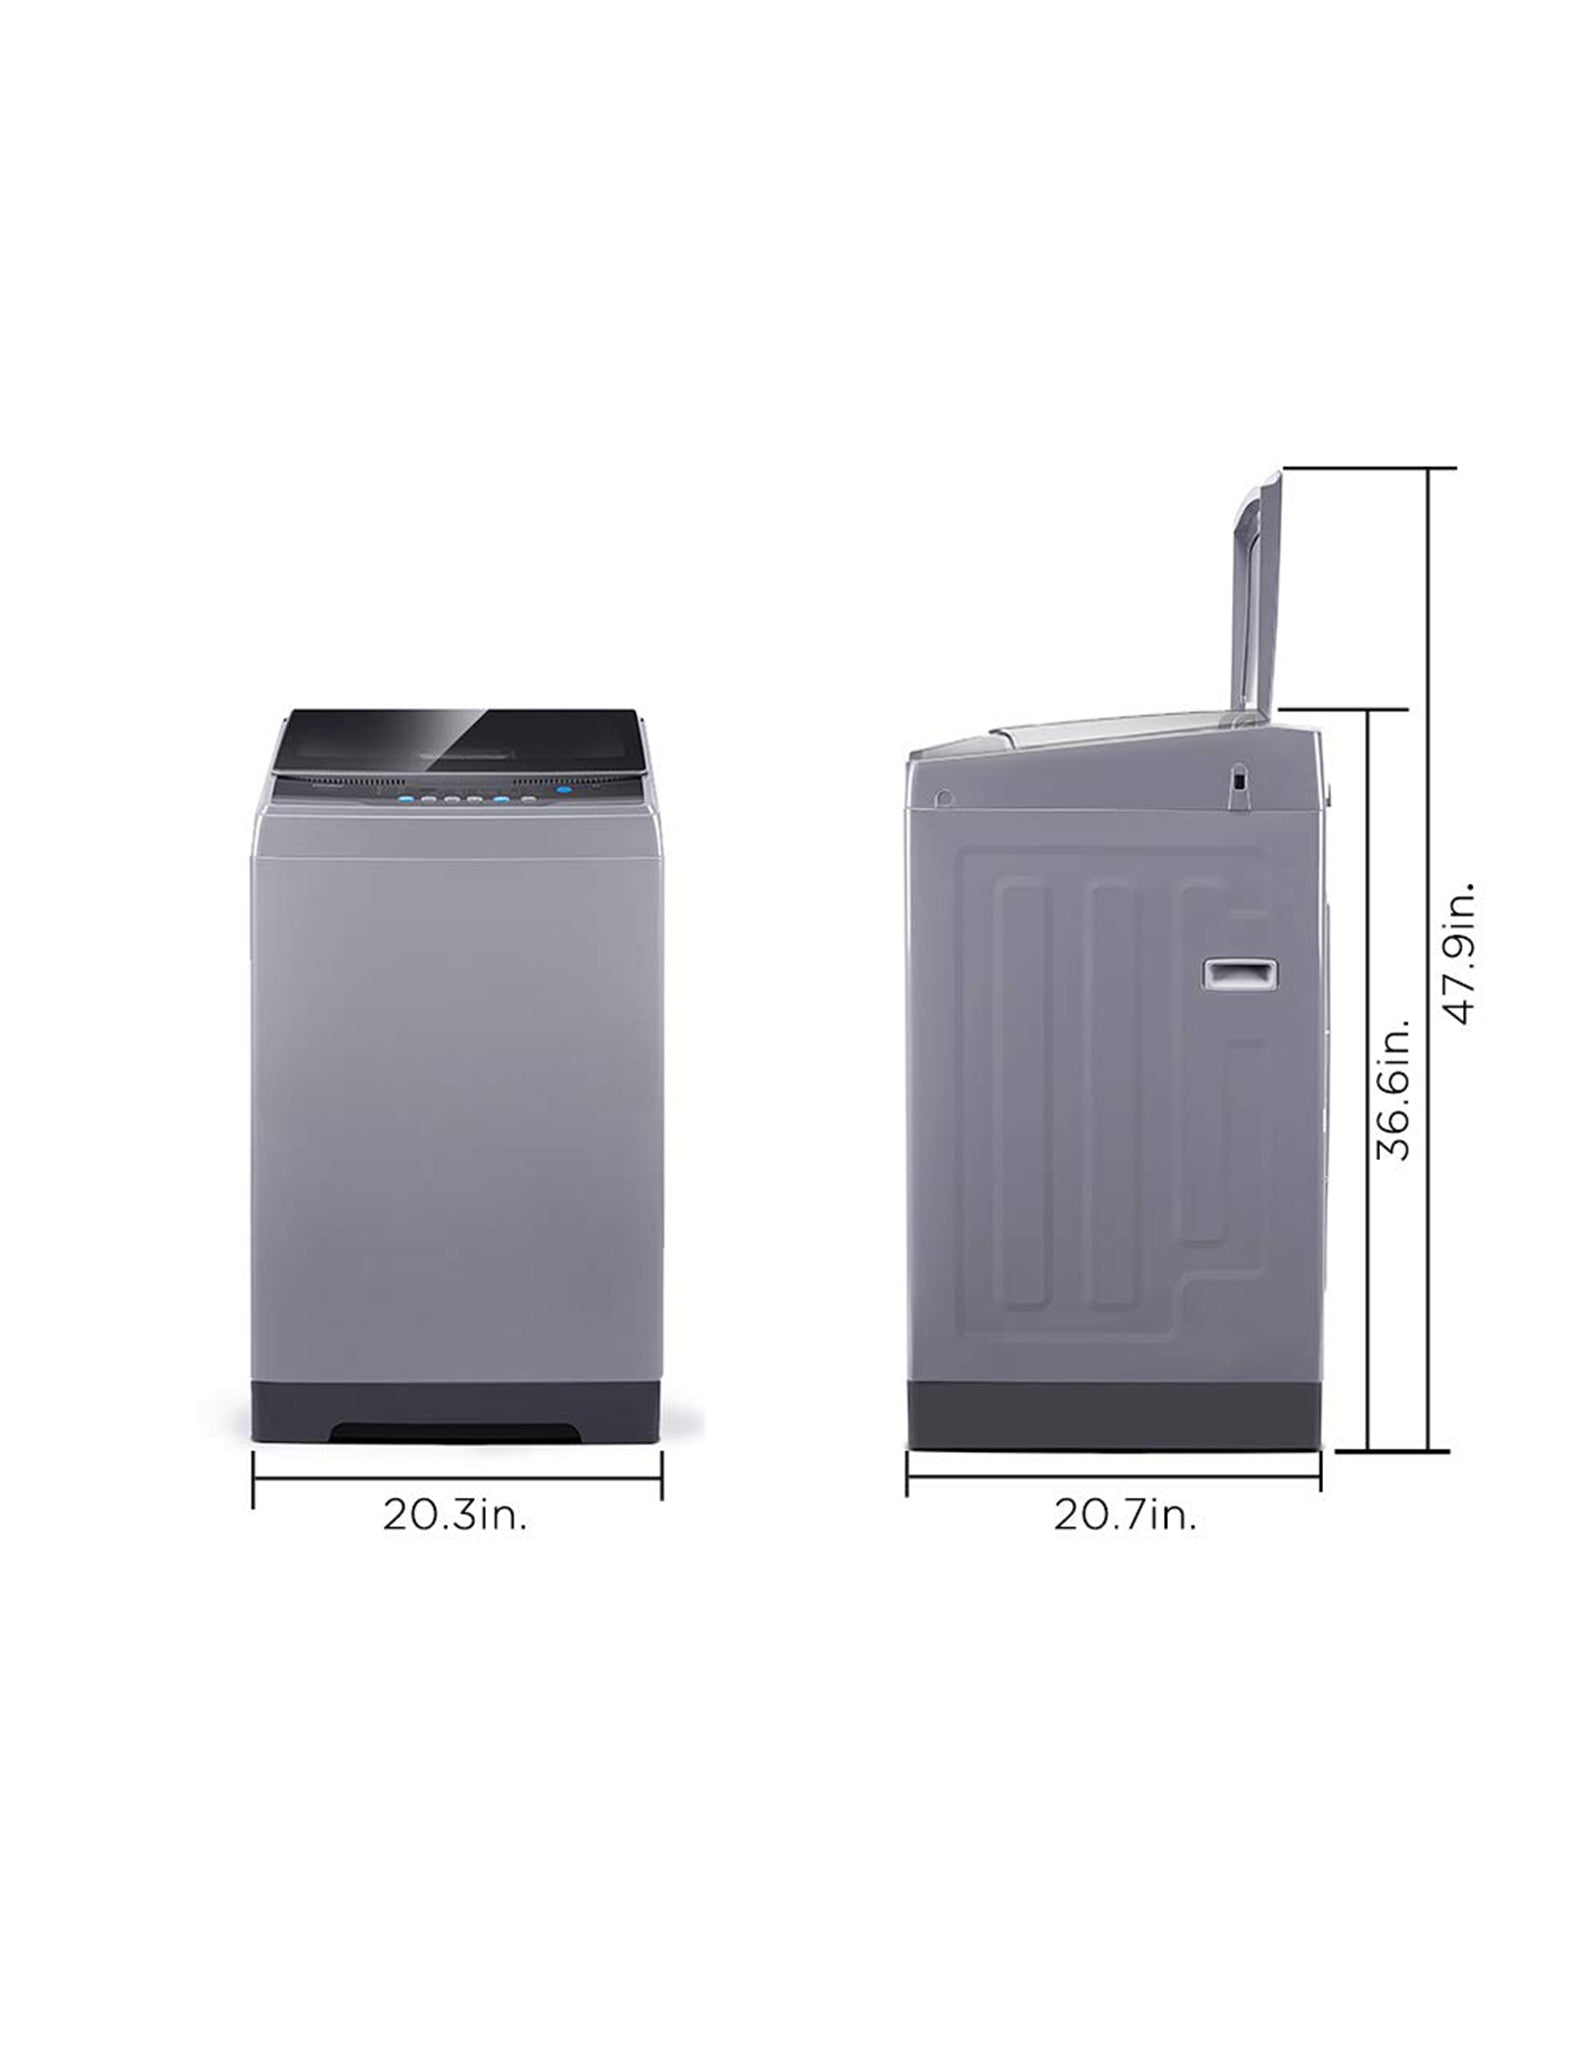 size dimensions of portable comfee washing machine